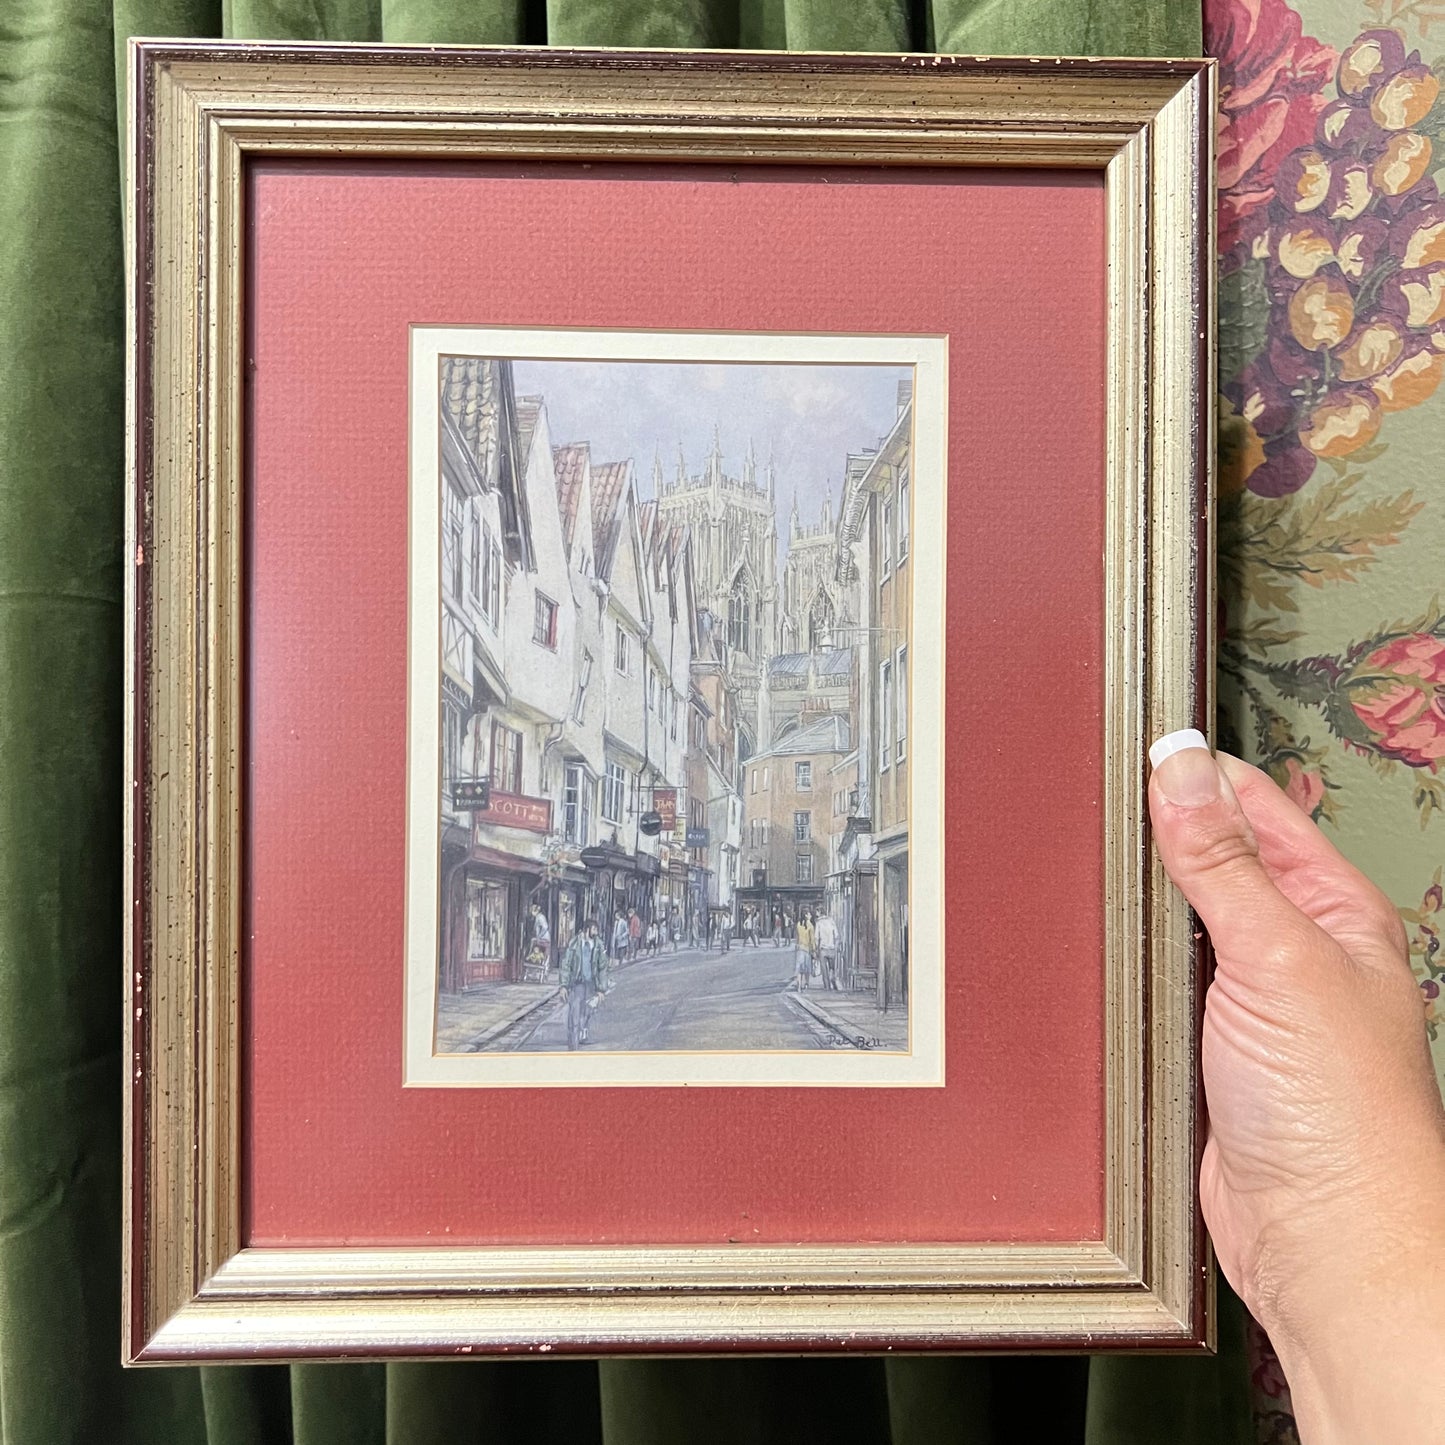 English Art Print Signed by Pat Bell Vintage Street Scape Watercolor Framed